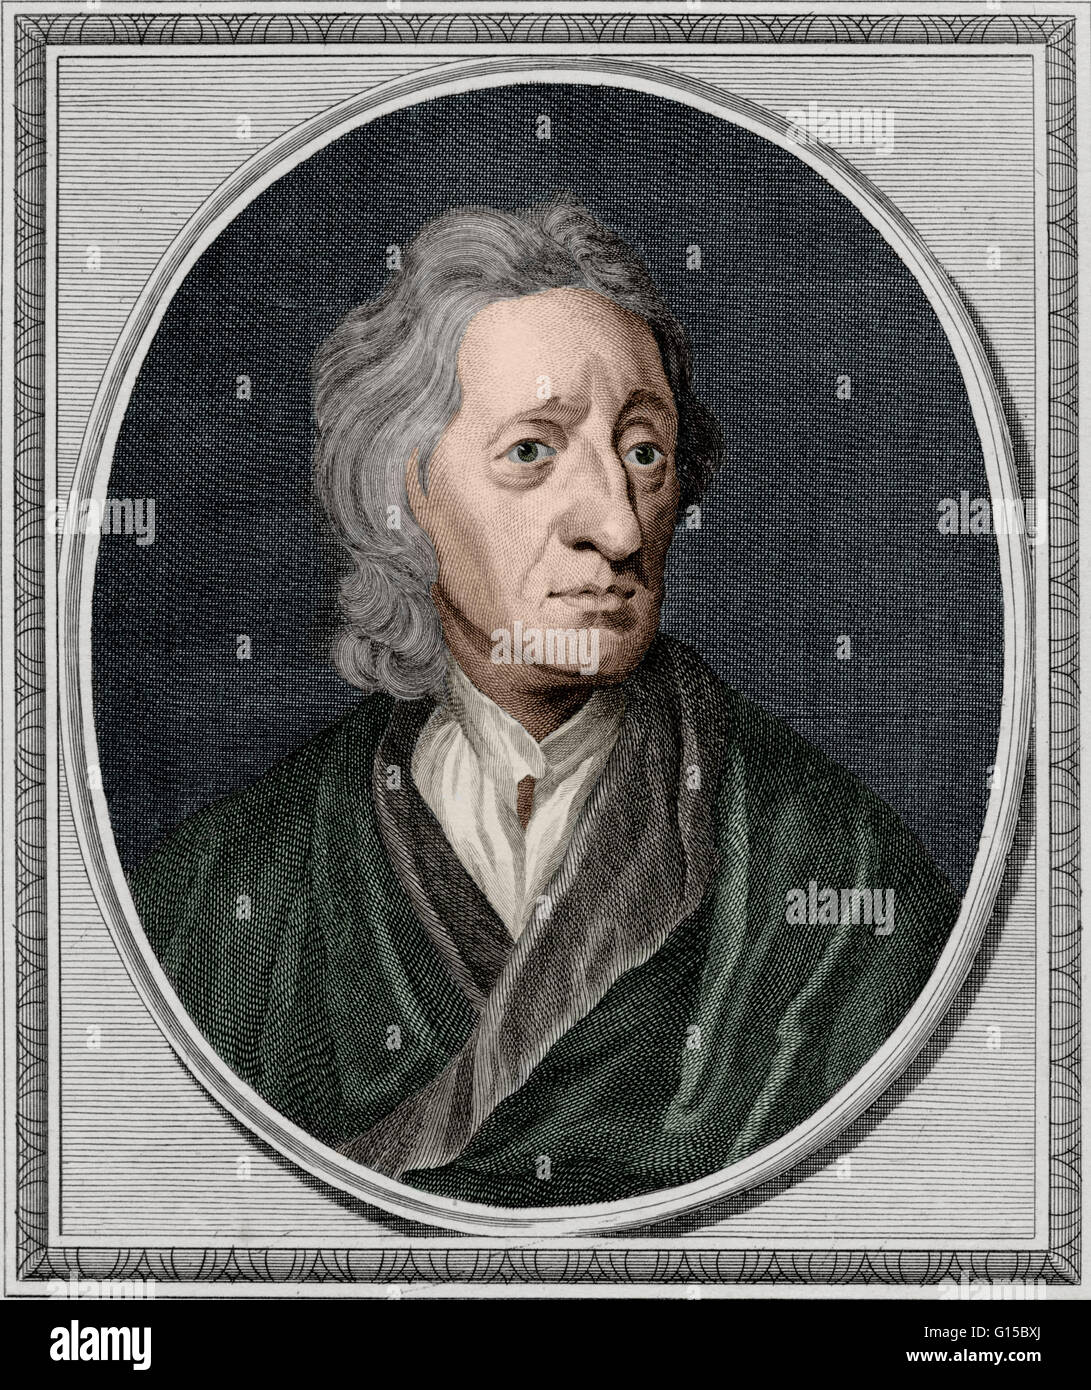 An engraving of John Locke from 1786. John Locke (1632-1704) was an English  philosopher who spent his early years lecturing at Oxford University,  England. He later spent fifteen years in France, where